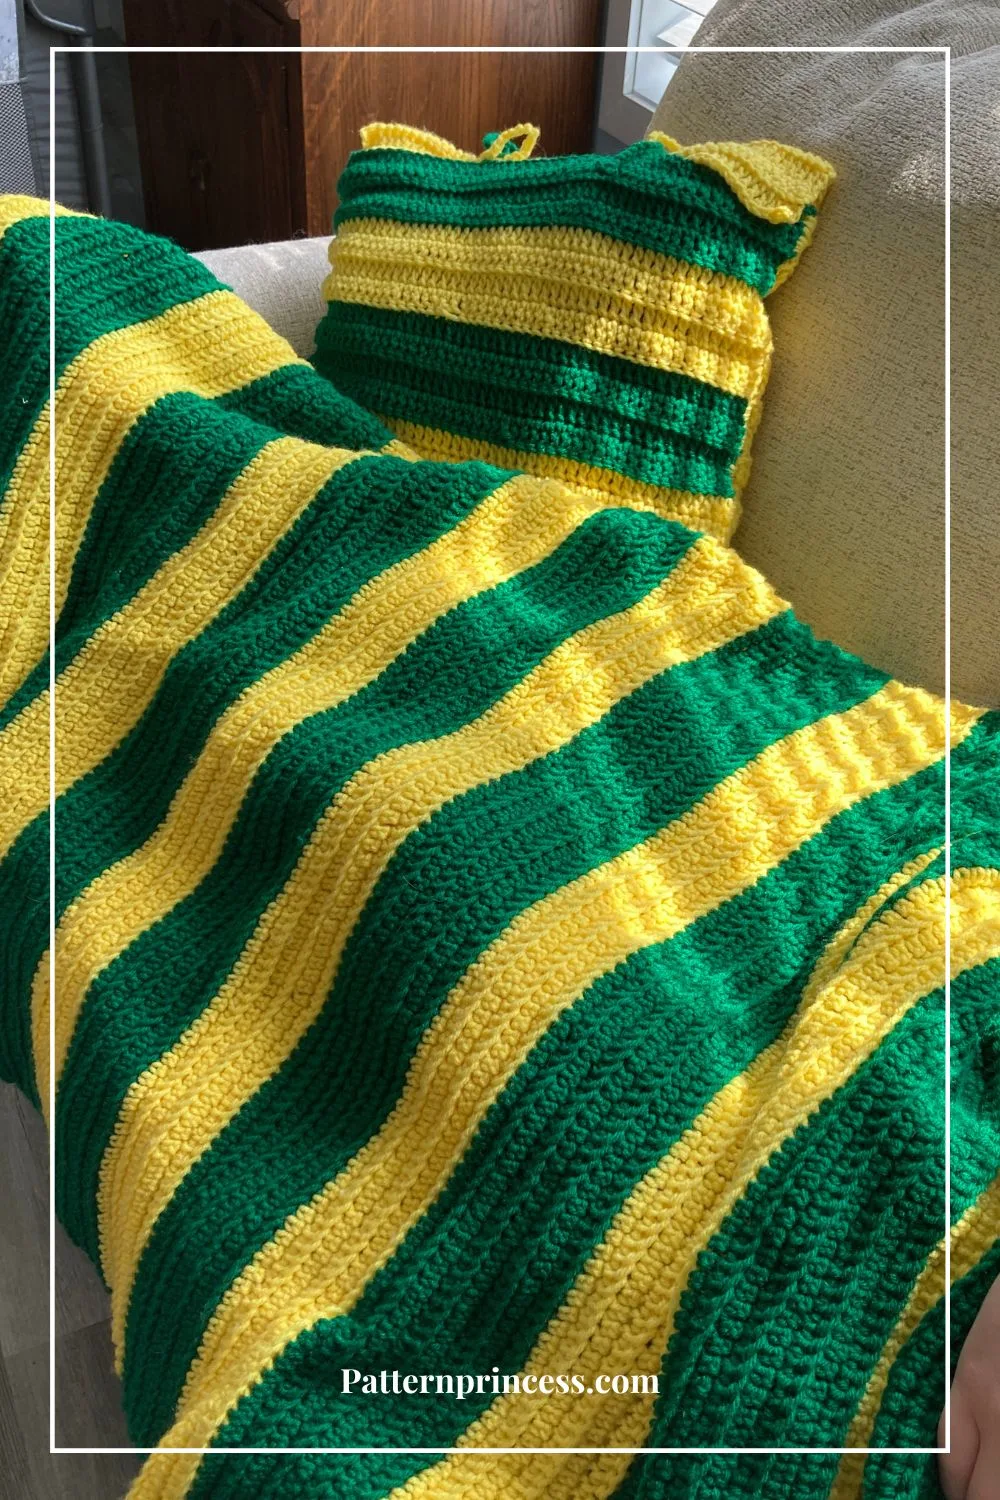 Easy snuggly throw blanket in green and gold yarn